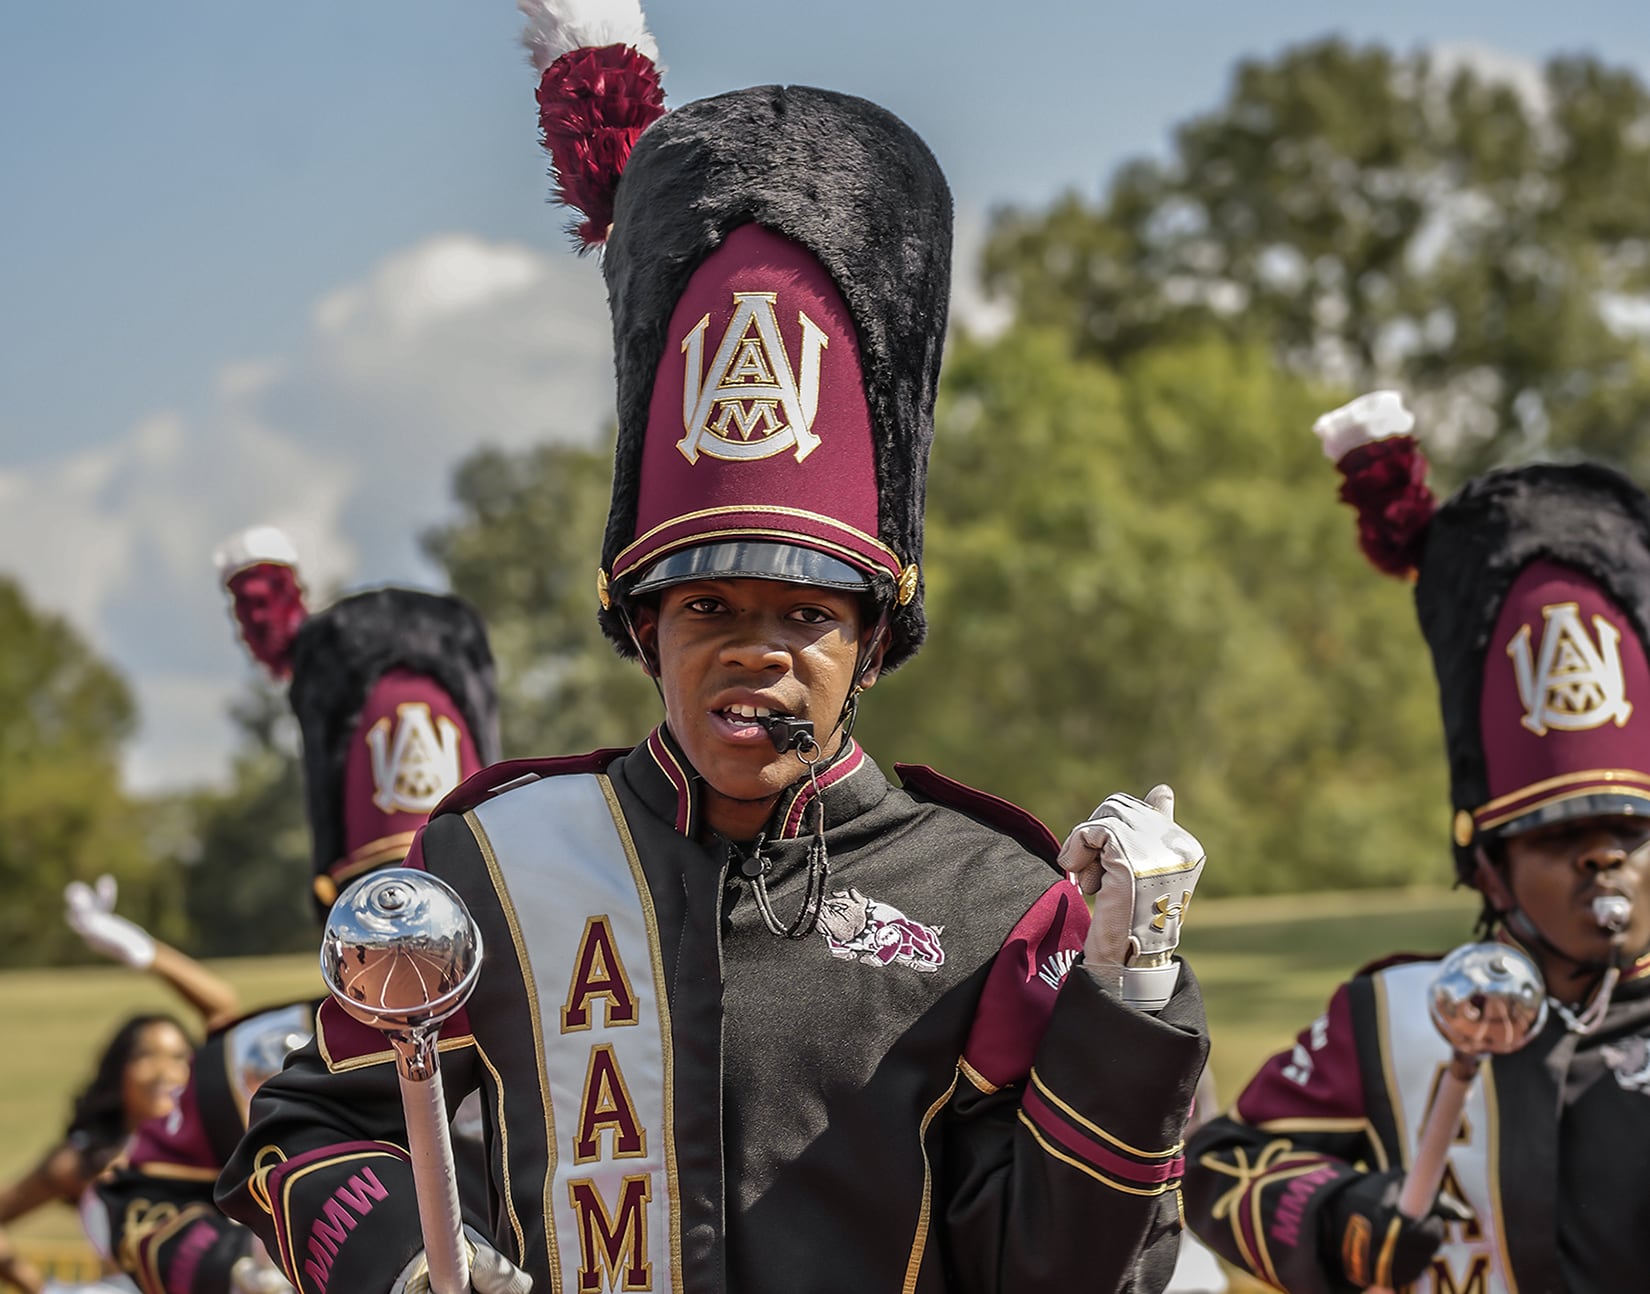 Alabama A&M marching band to lead the Macy’s Thanksgiving Day Parade